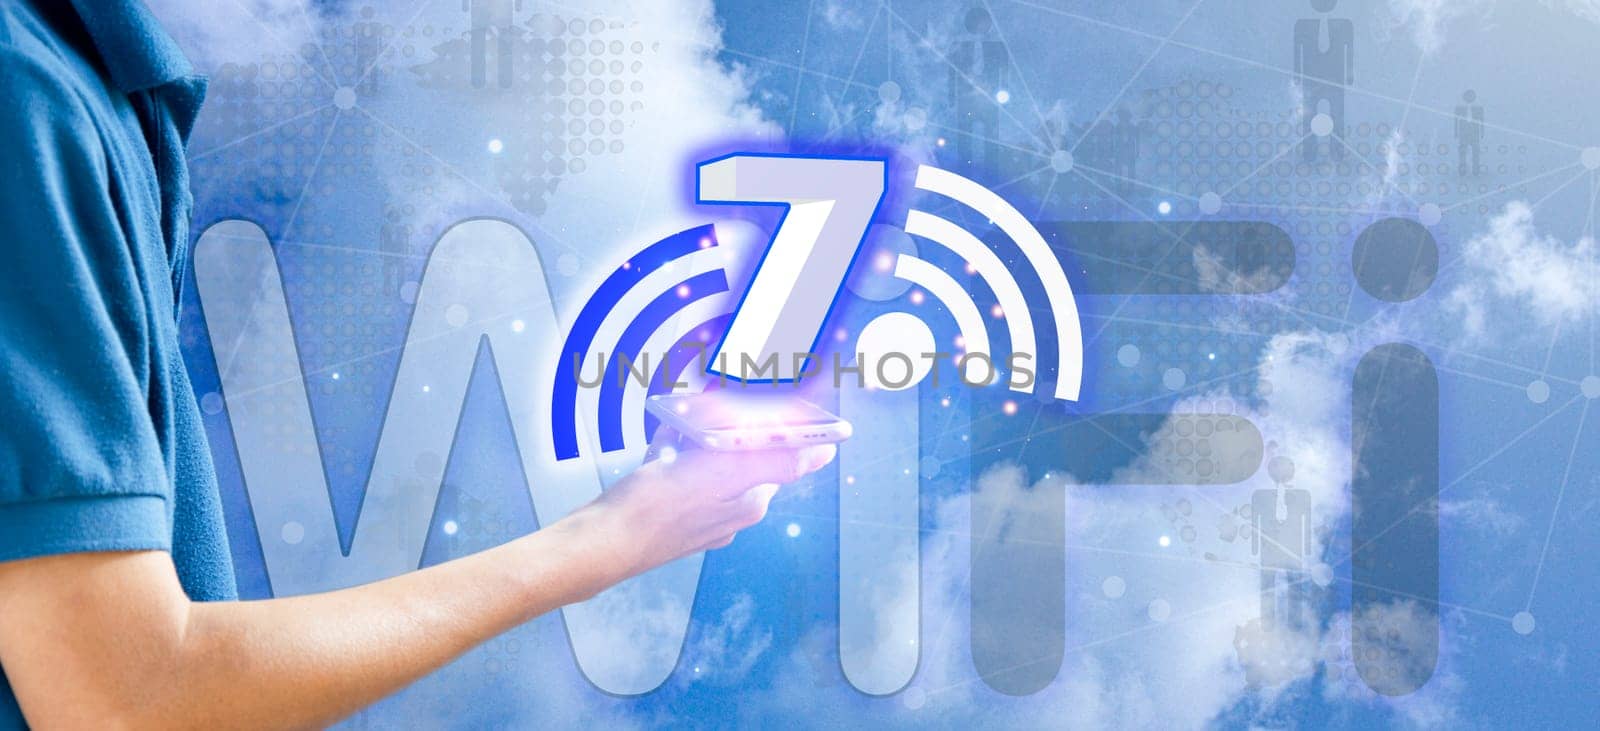 Concept of Wi-Fi 7 or Wi-Fi 7 development, high-speed connection